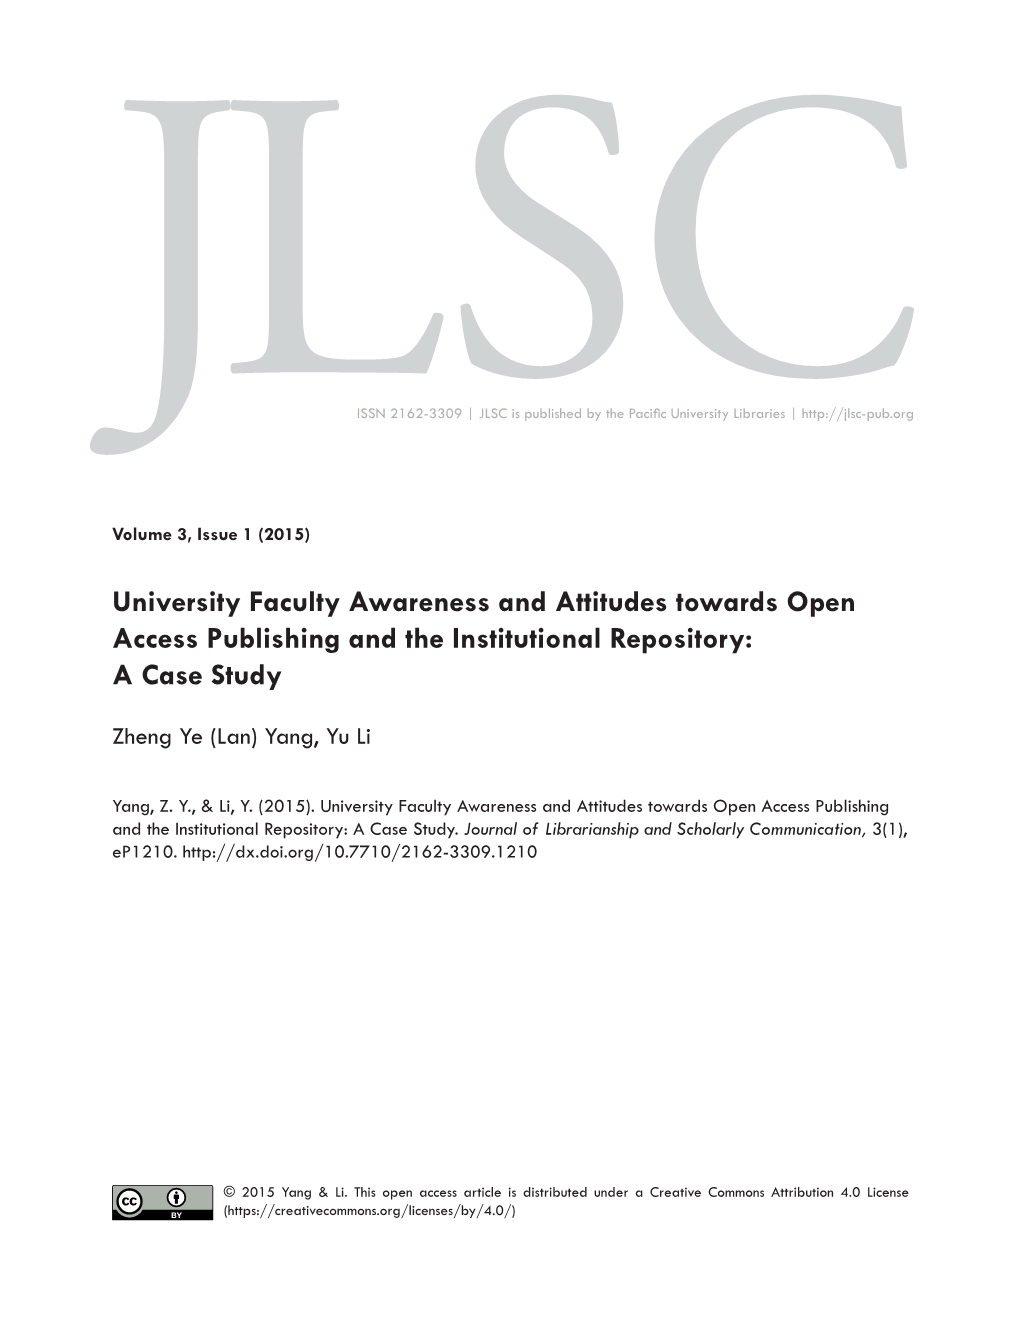 University Faculty Awareness and Attitudes Towards Open Access Publishing and the Institutional Repository: a Case Study